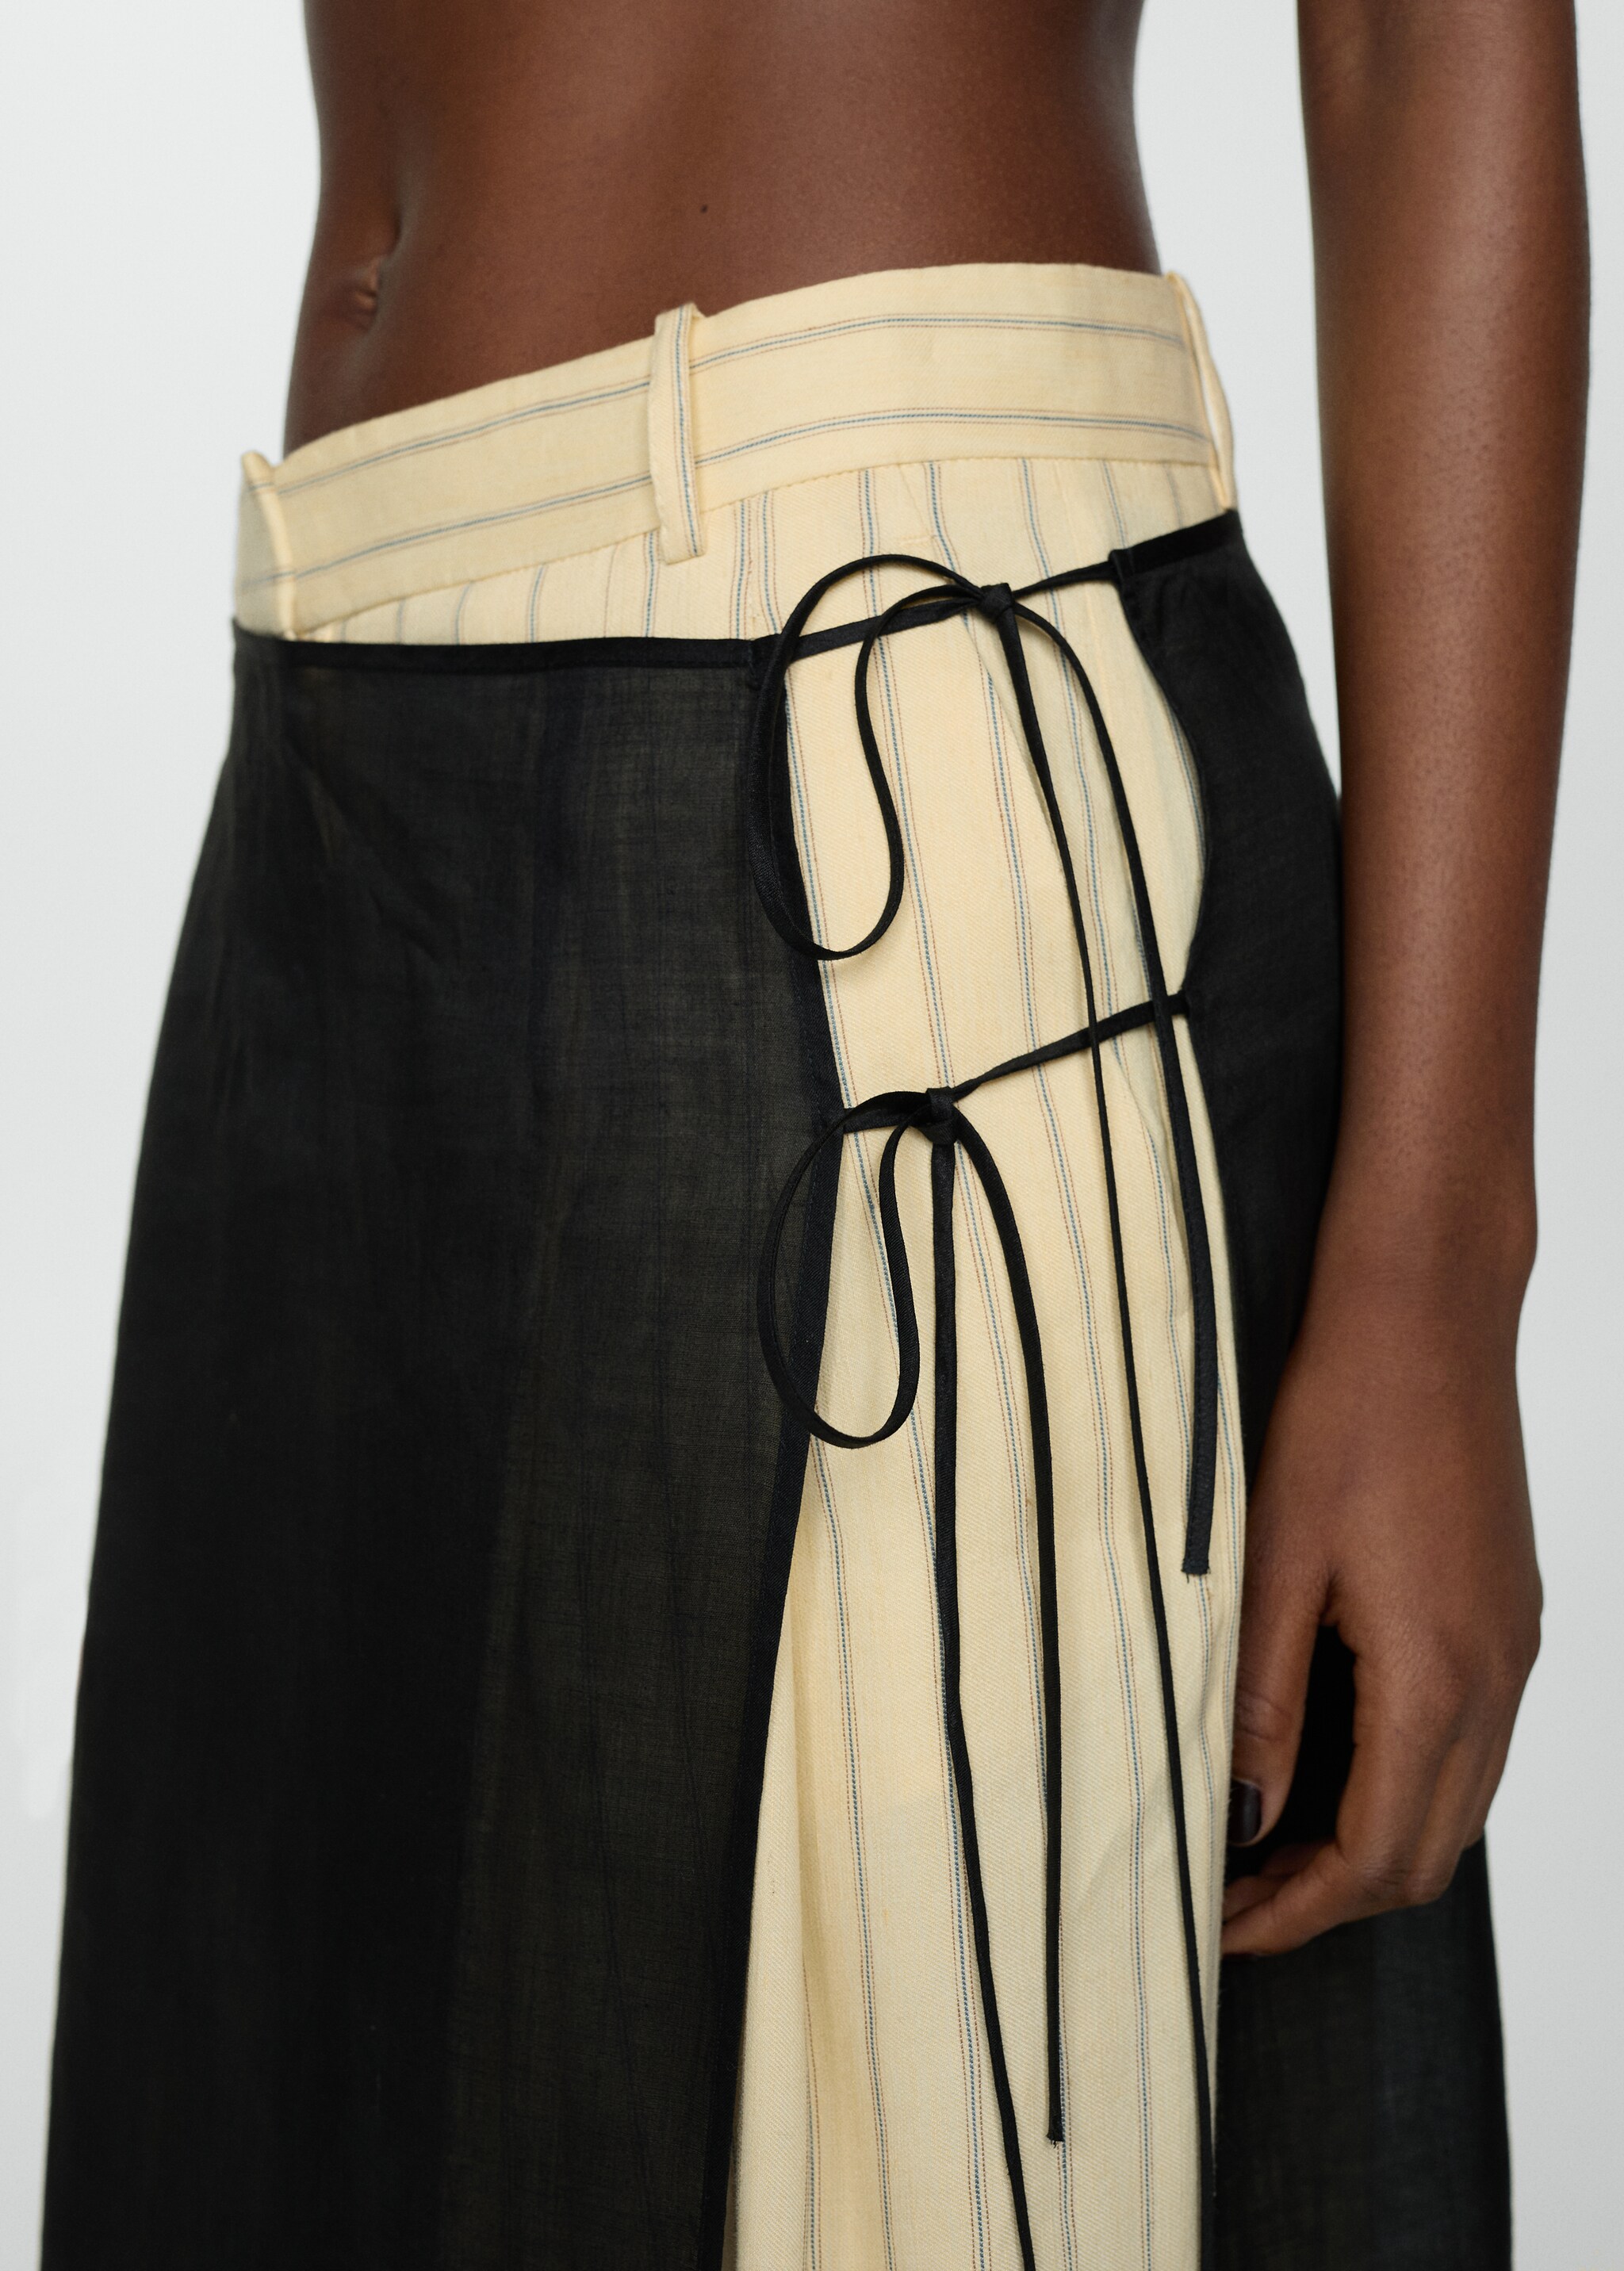 Ramio pareo skirt with slit - Details of the article 1